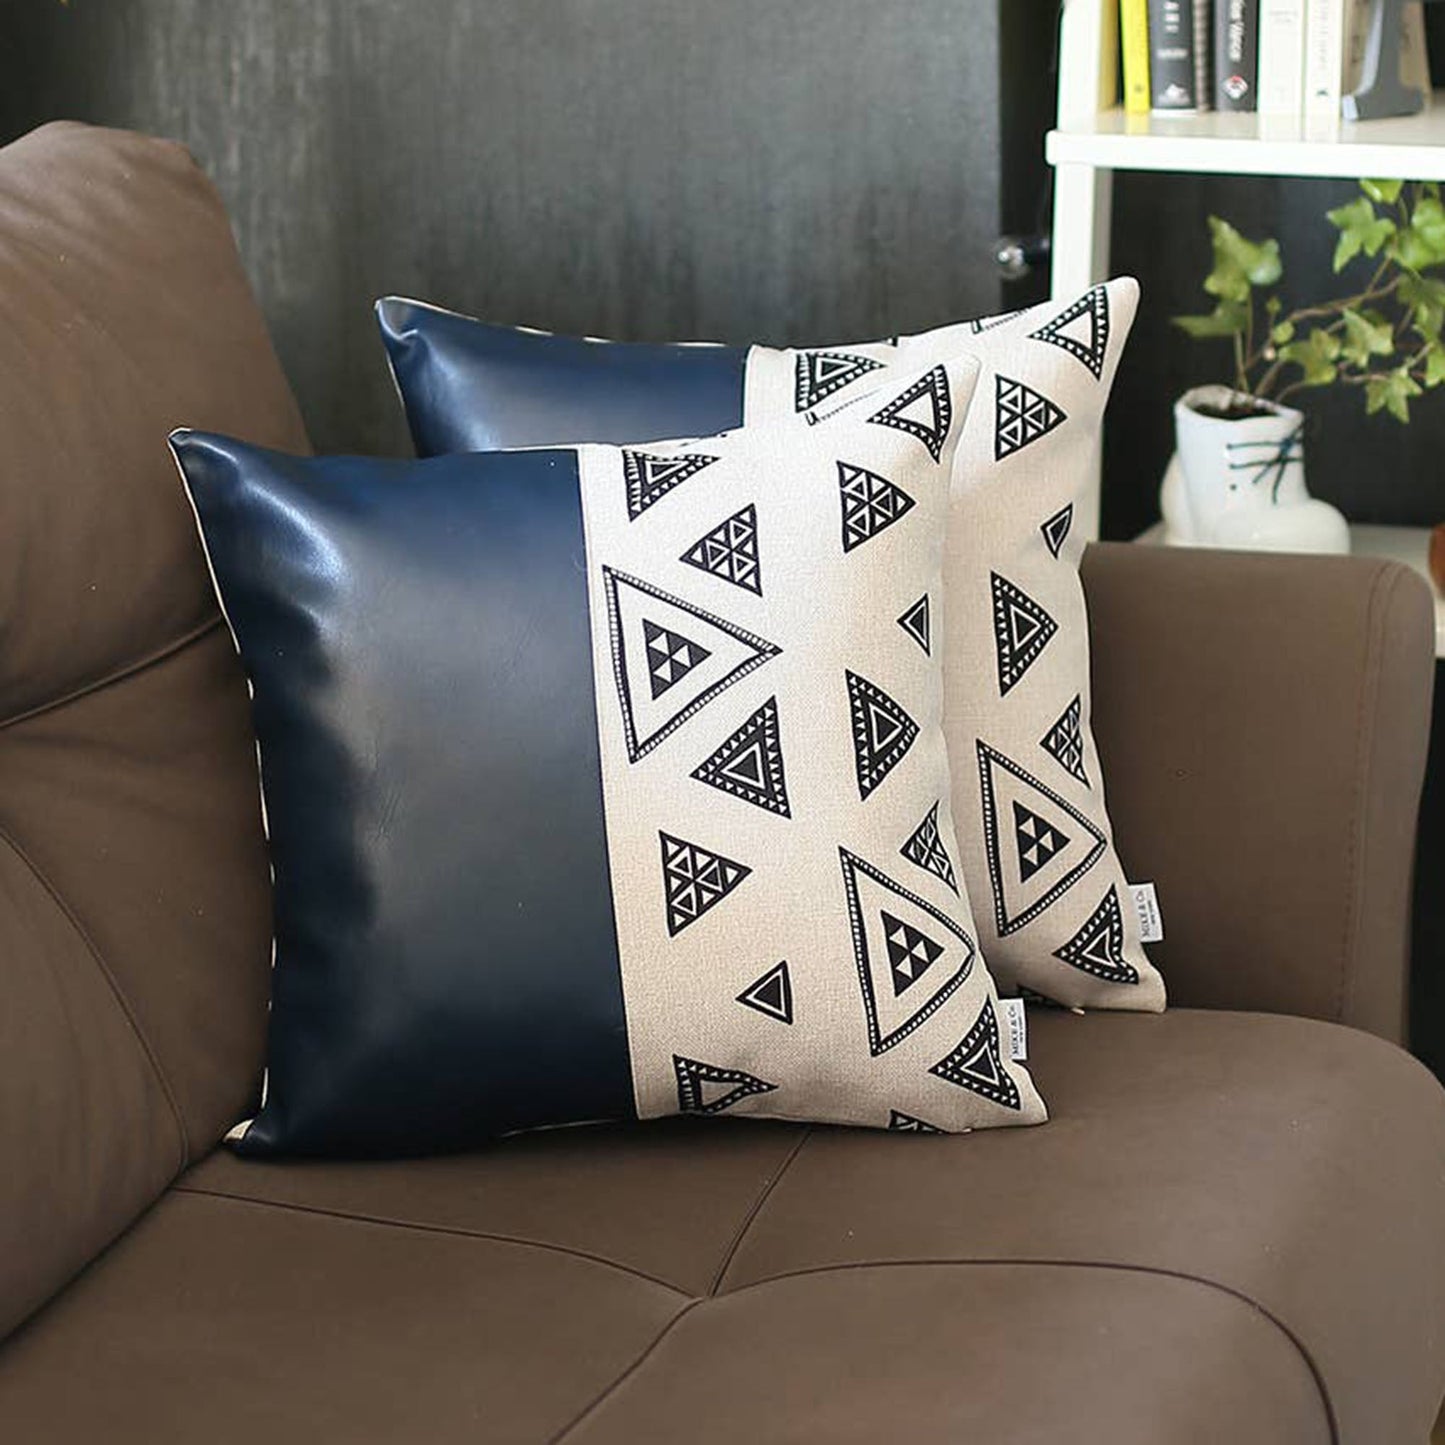 Set of 2 Vegan Faux Leather Handcrafted Decorative Throw Pillow Cover (Geometric Square)